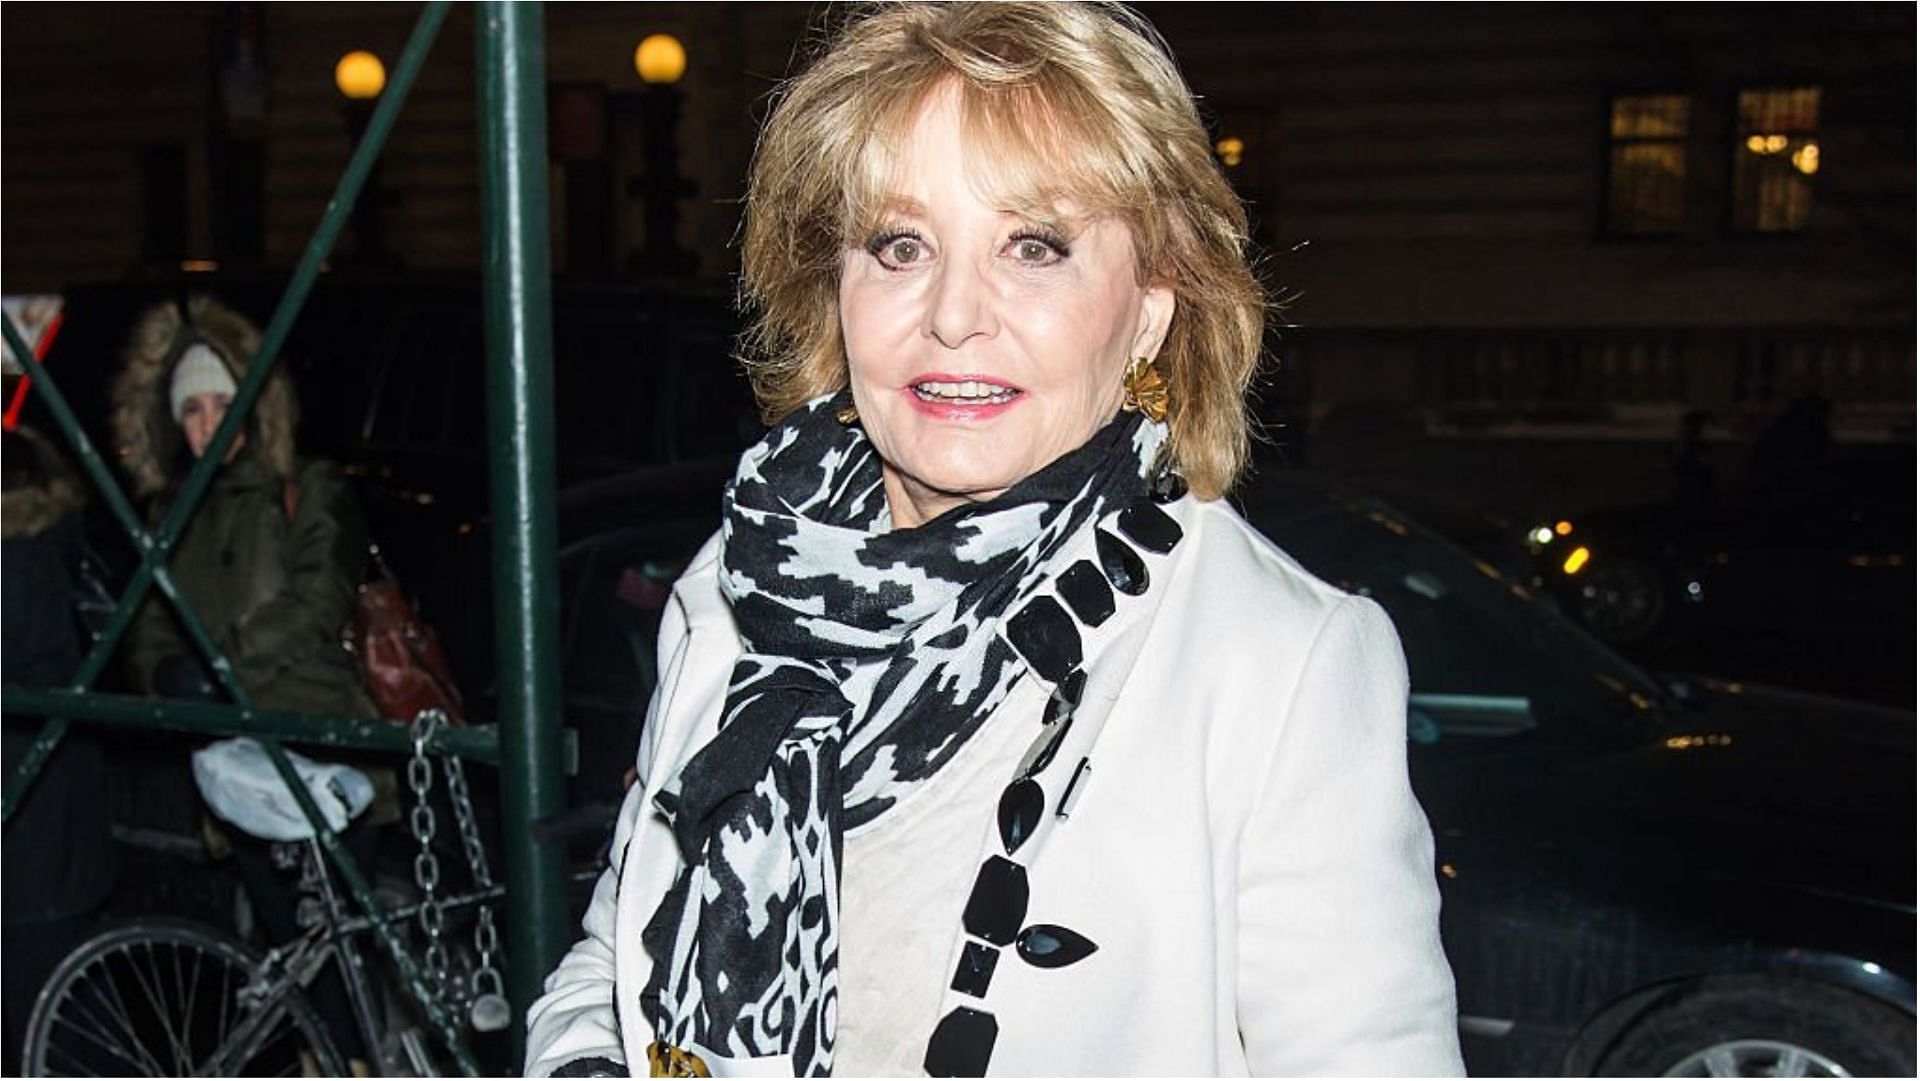 Barbara Walters recently died at the age of 93 (Image via Gilbert Carrasquillo/Getty Images)